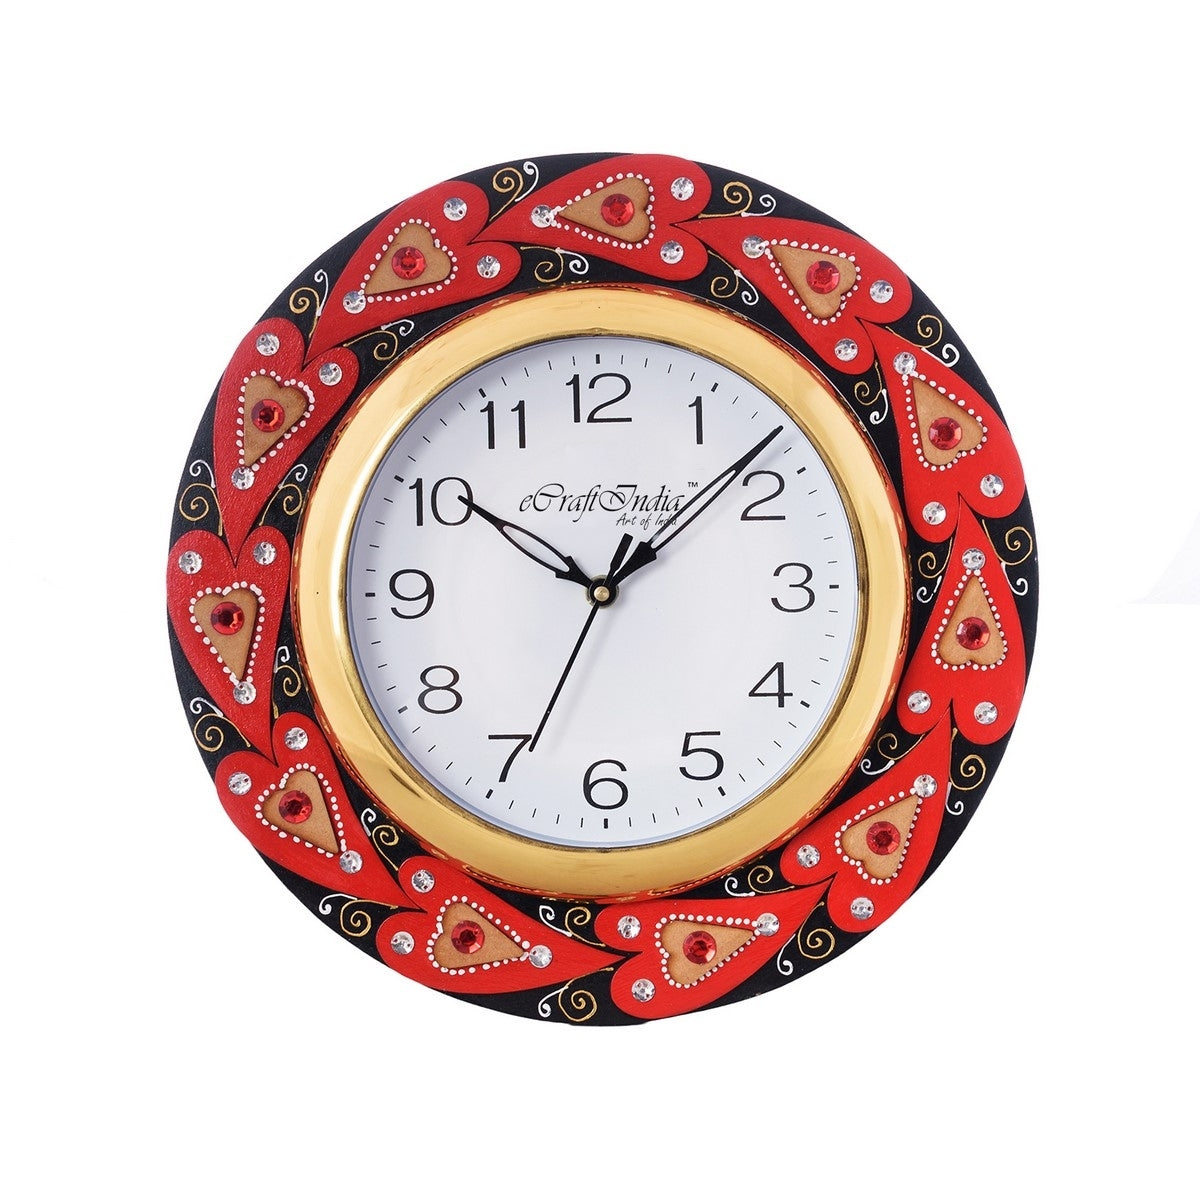 Creative Crystal studded Red Hearts Wooden Handcrafted Wall Clock